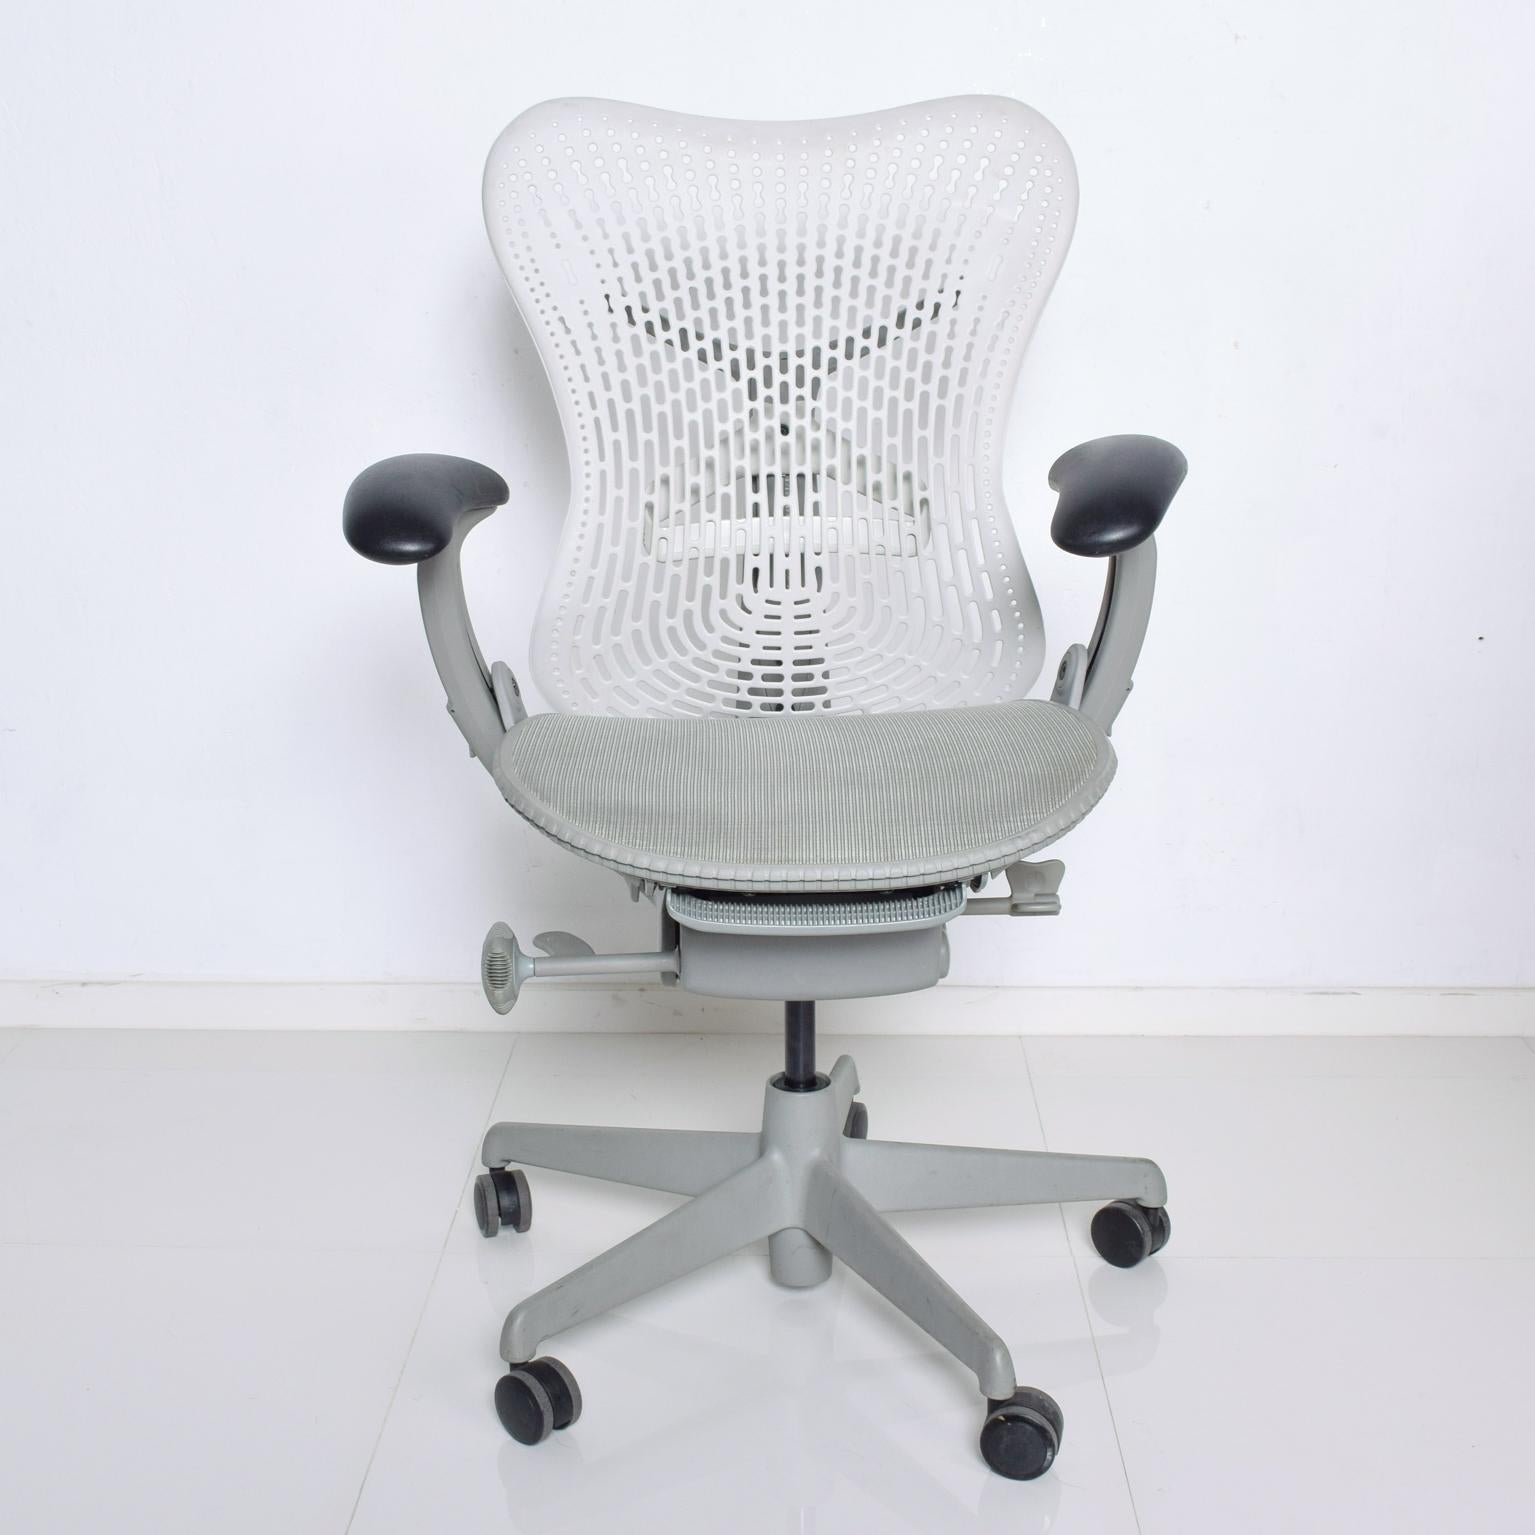 For your comfort: Herman Miller modern office chair, Mirra 2, white and gray dimensions: 41 3/4